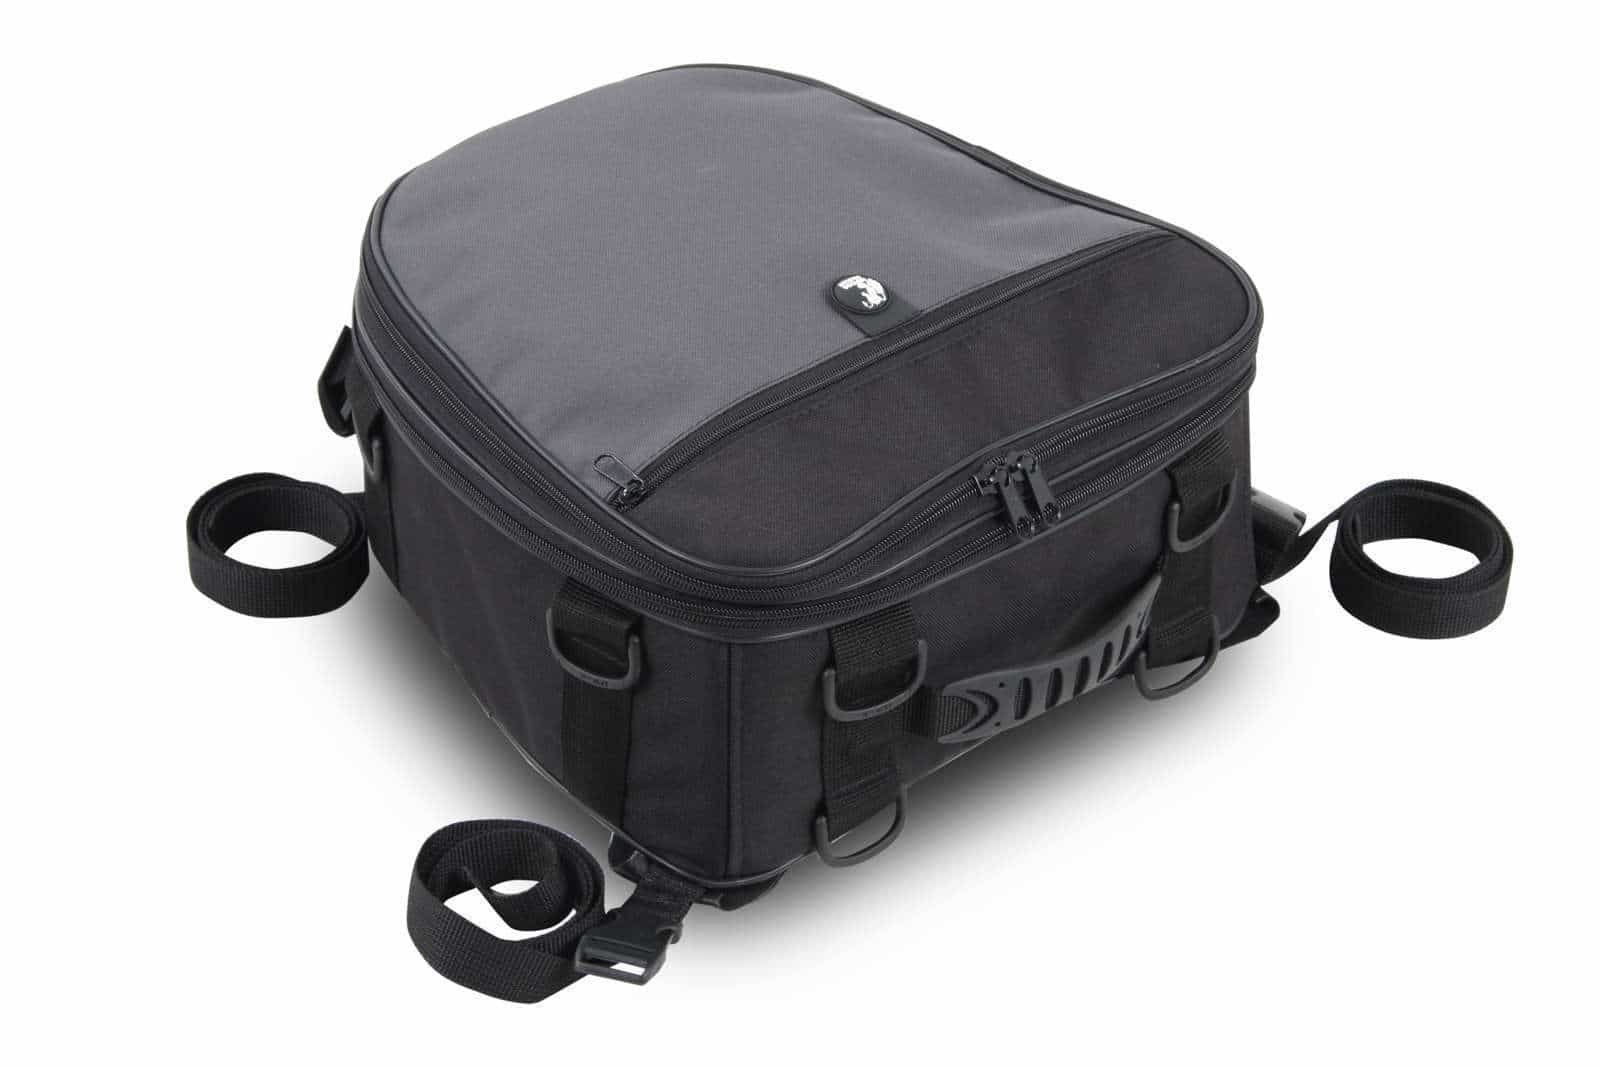 Small Sport Star rear bag 18-28 ltr with belt attachment